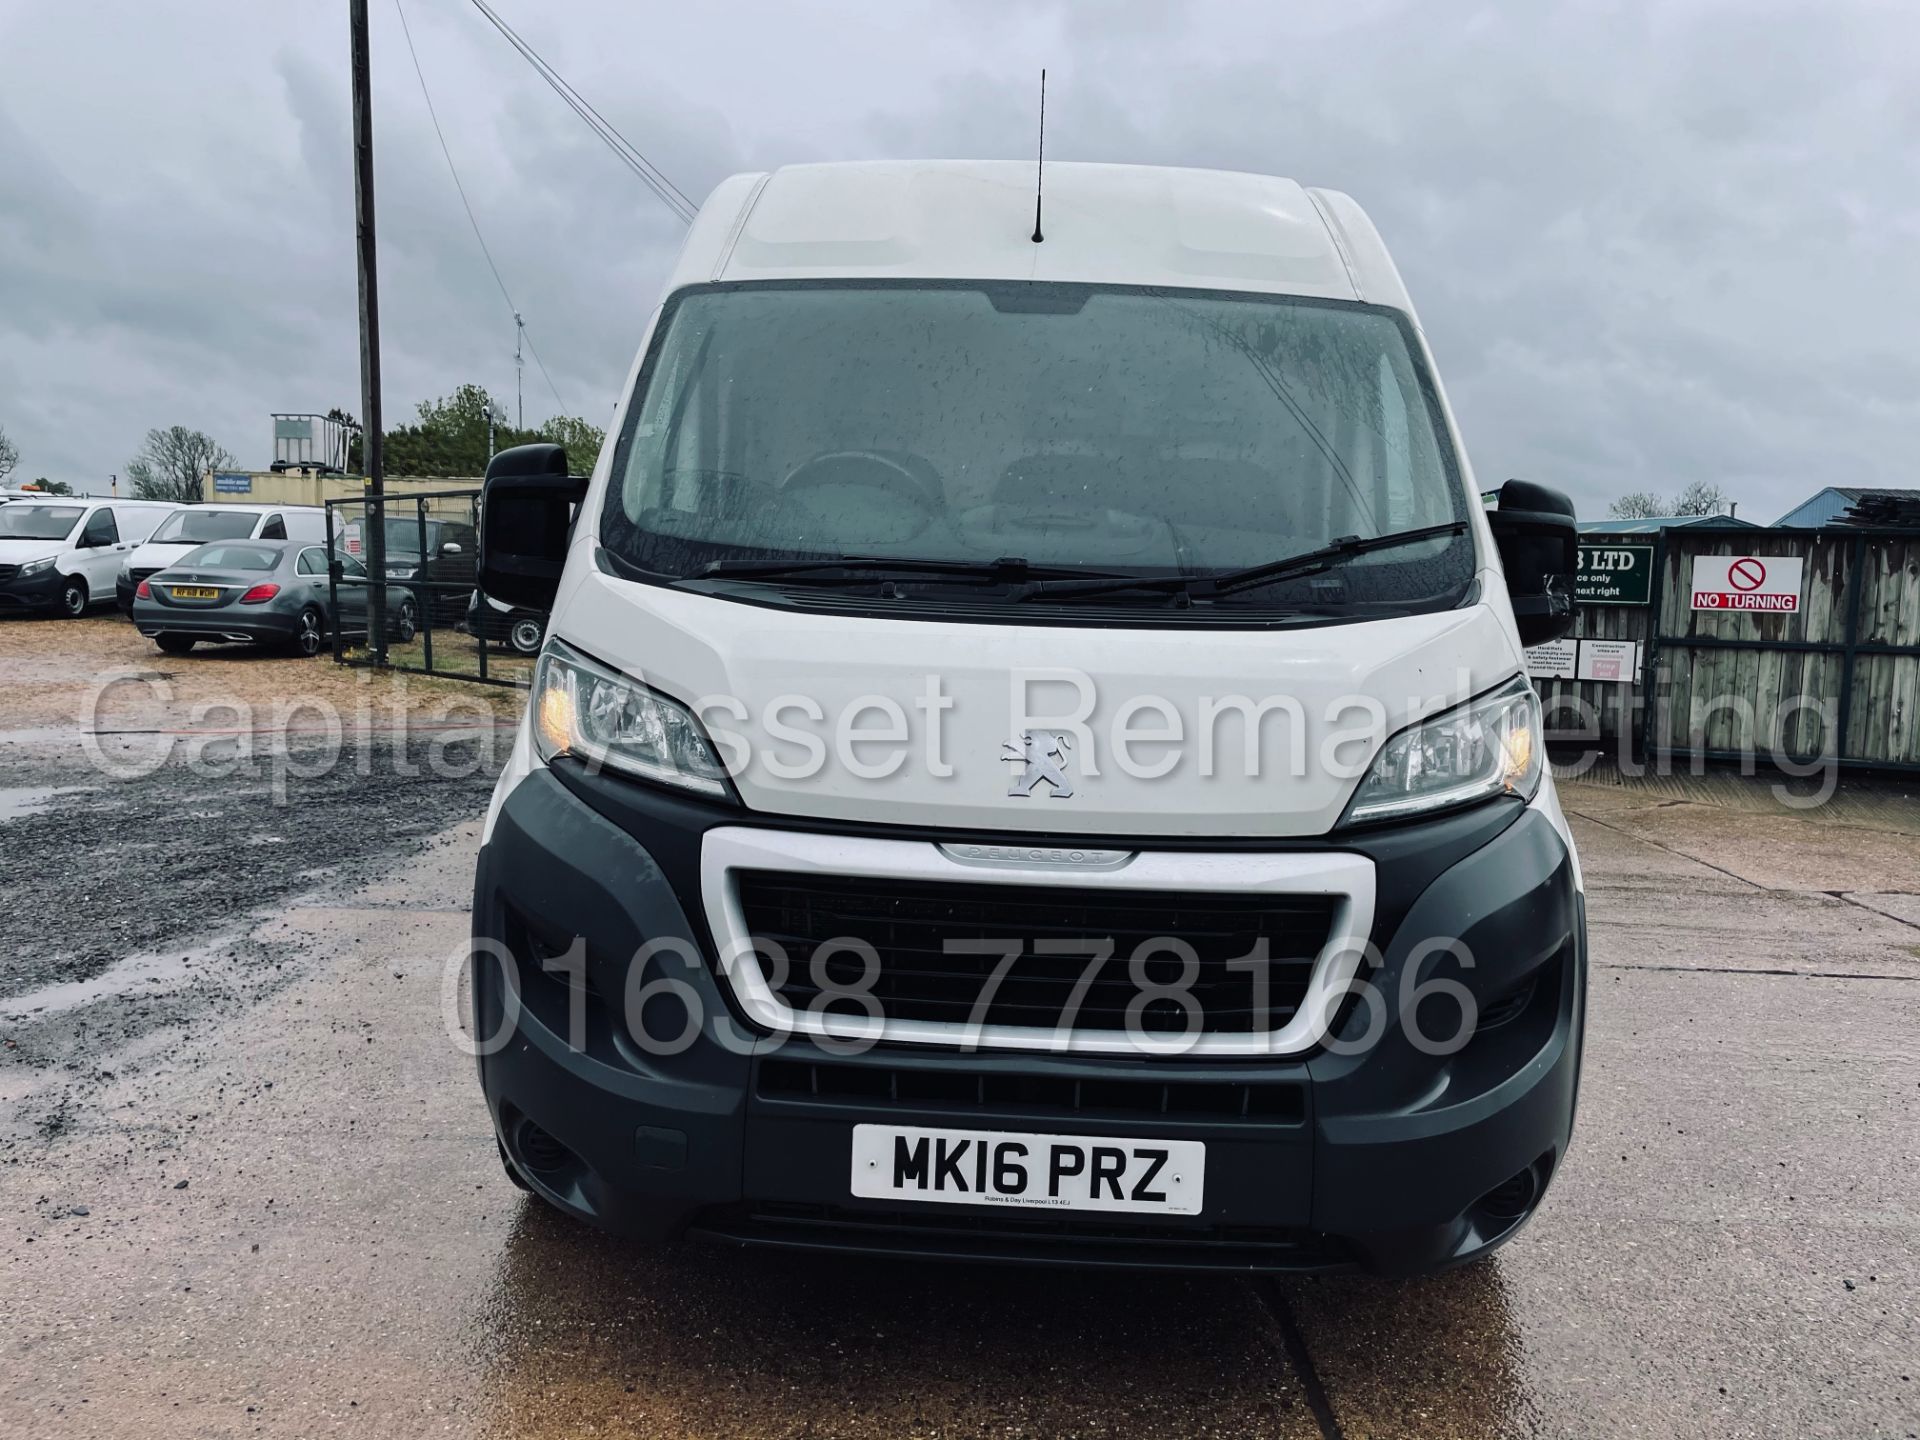 PEUGEOT BOXER 335 *PROFESSIONAL* LWB HI-ROOF (2016) '2.2 HDI - 130 BHP - 6 SPEED' *A/C* (1 OWNER) - Image 4 of 41